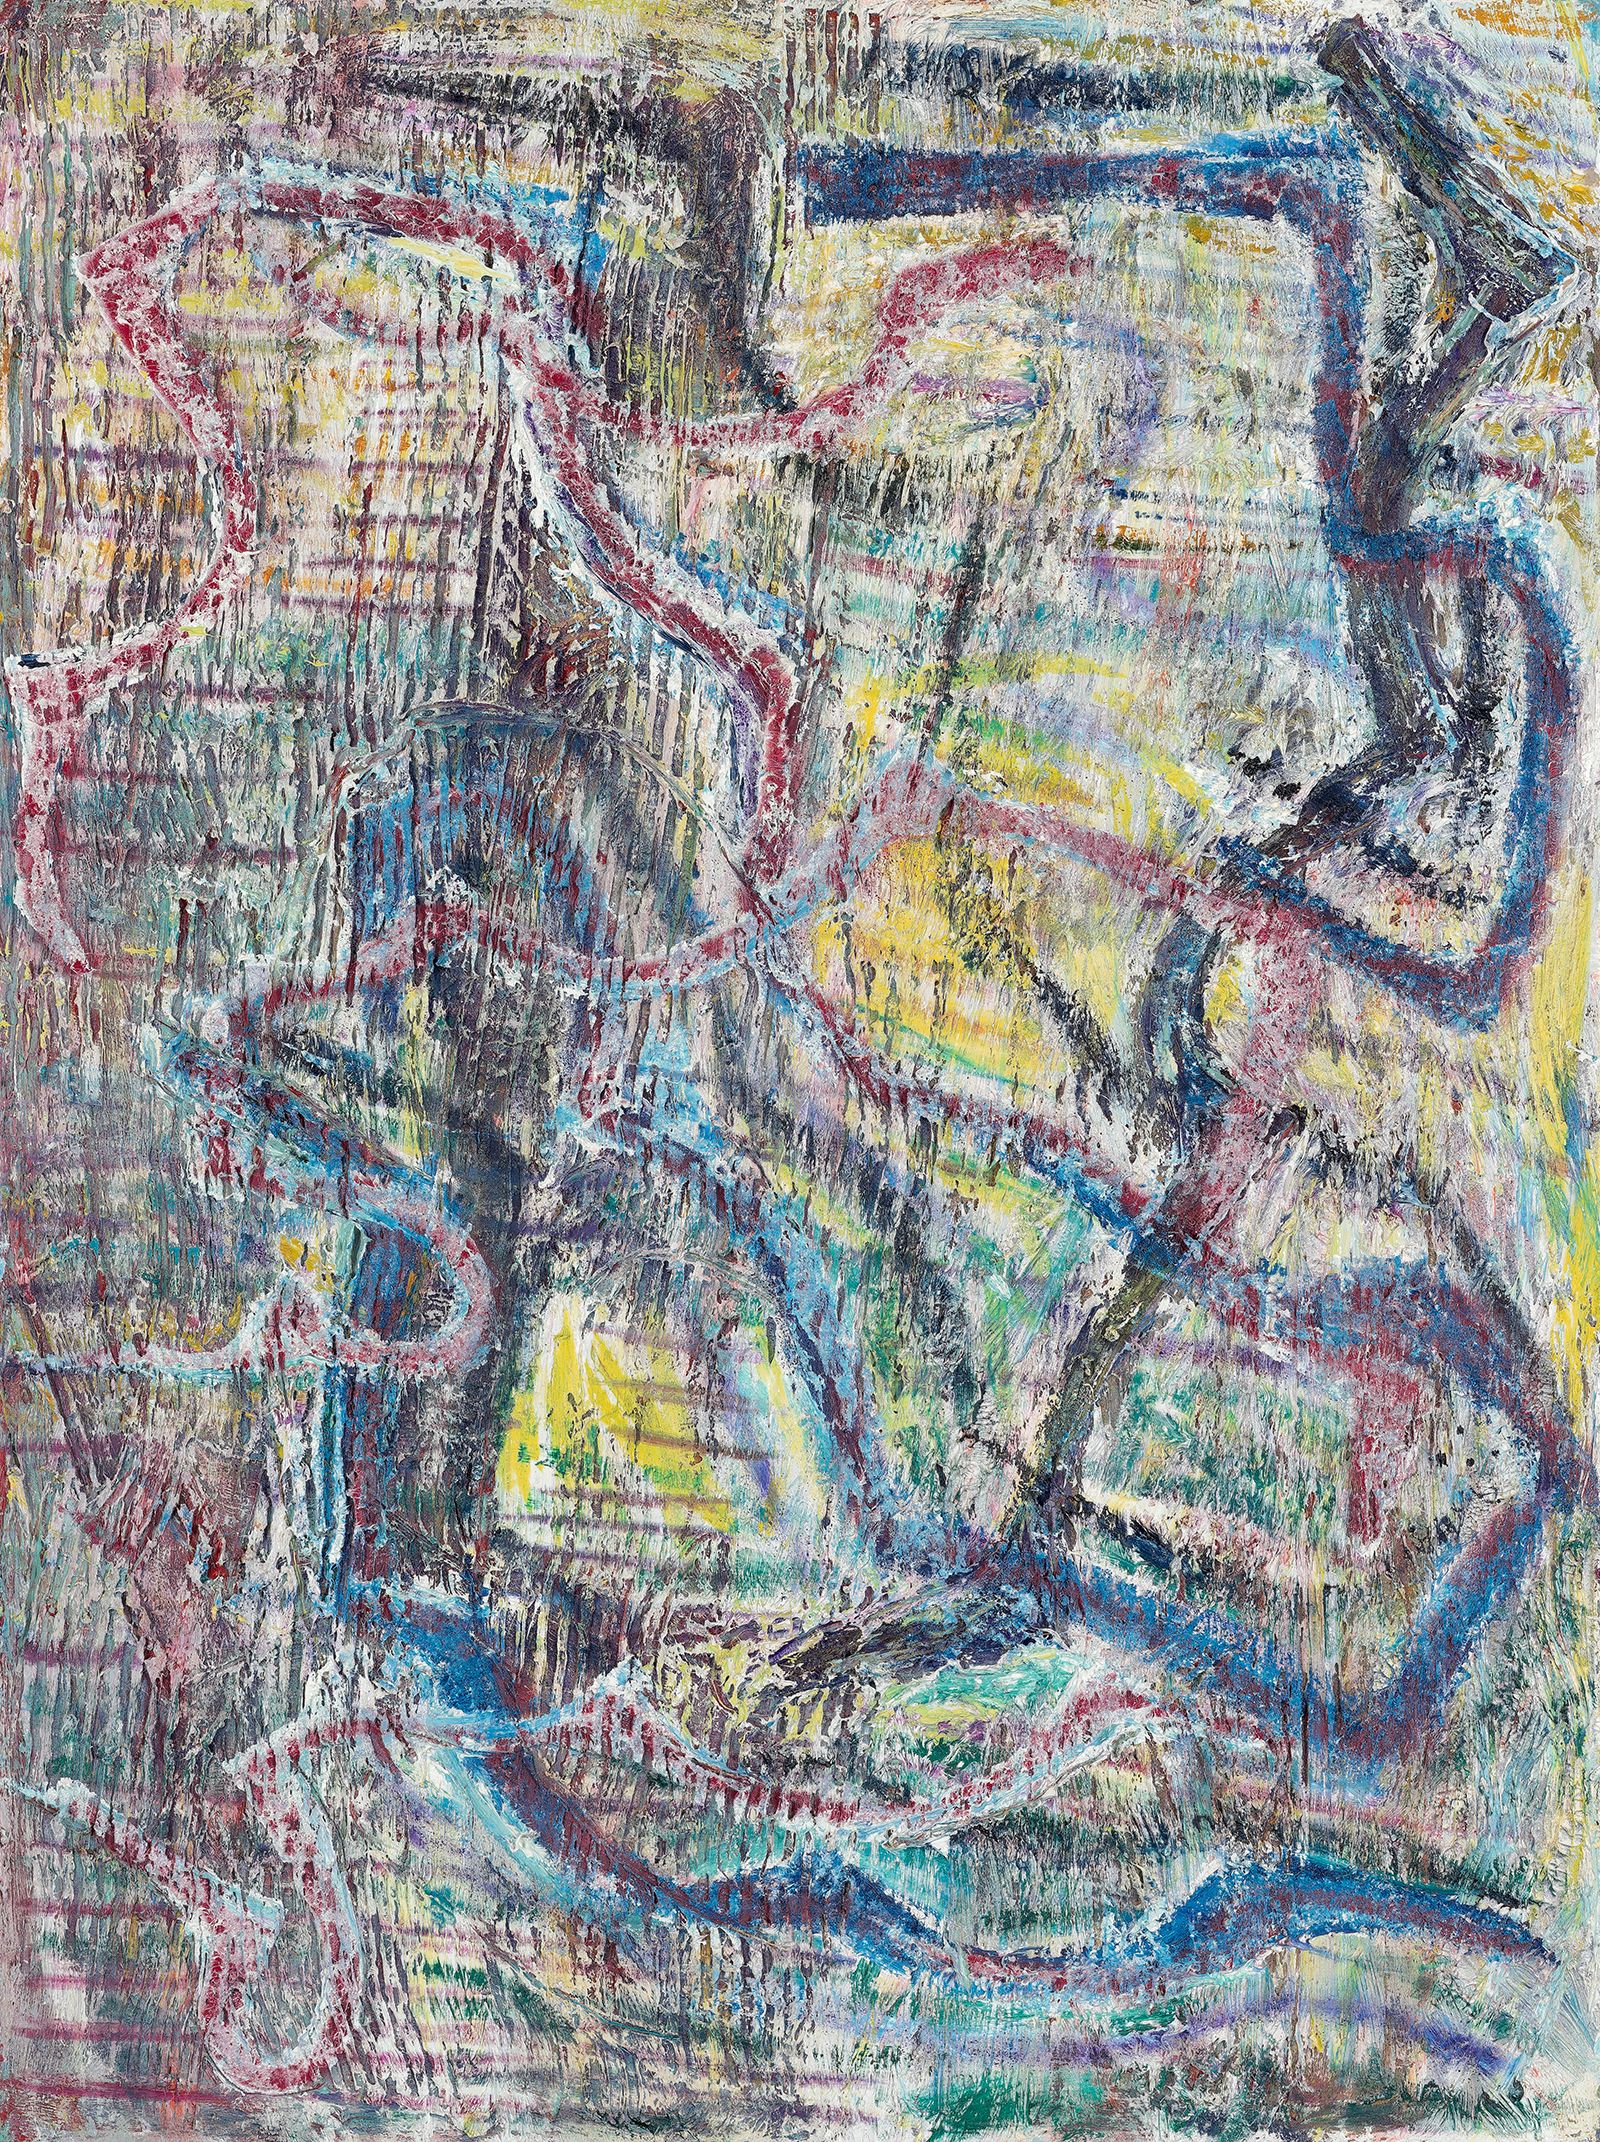 Gabriel Hartley, Yank, 2014, oil and spray paint on canvas, 63 3/4 x 47 3/4 in.